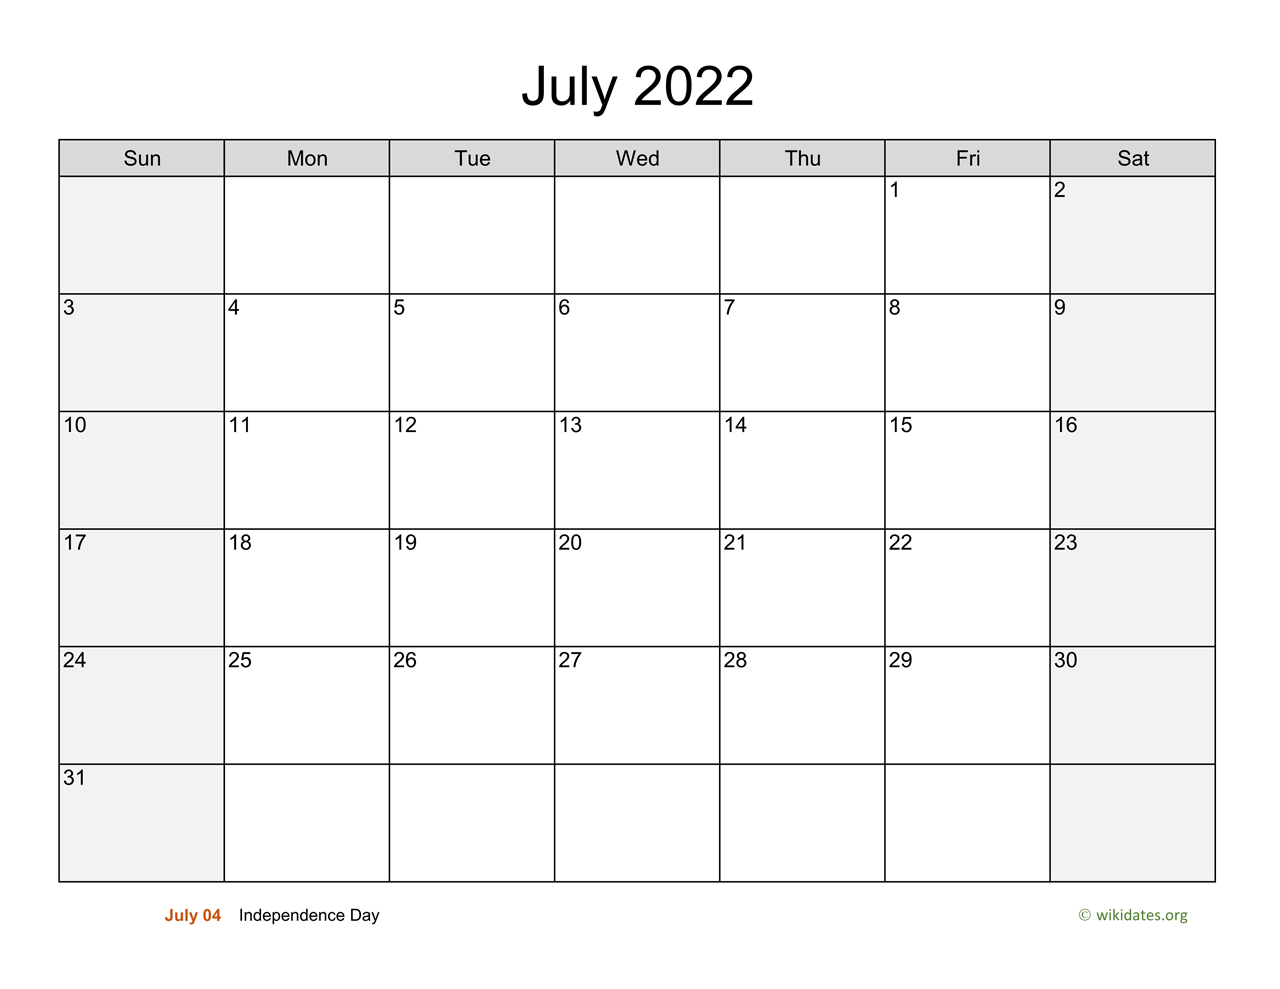 July 2022 Schedule July 2022 Calendar With Weekend Shaded | Wikidates.org